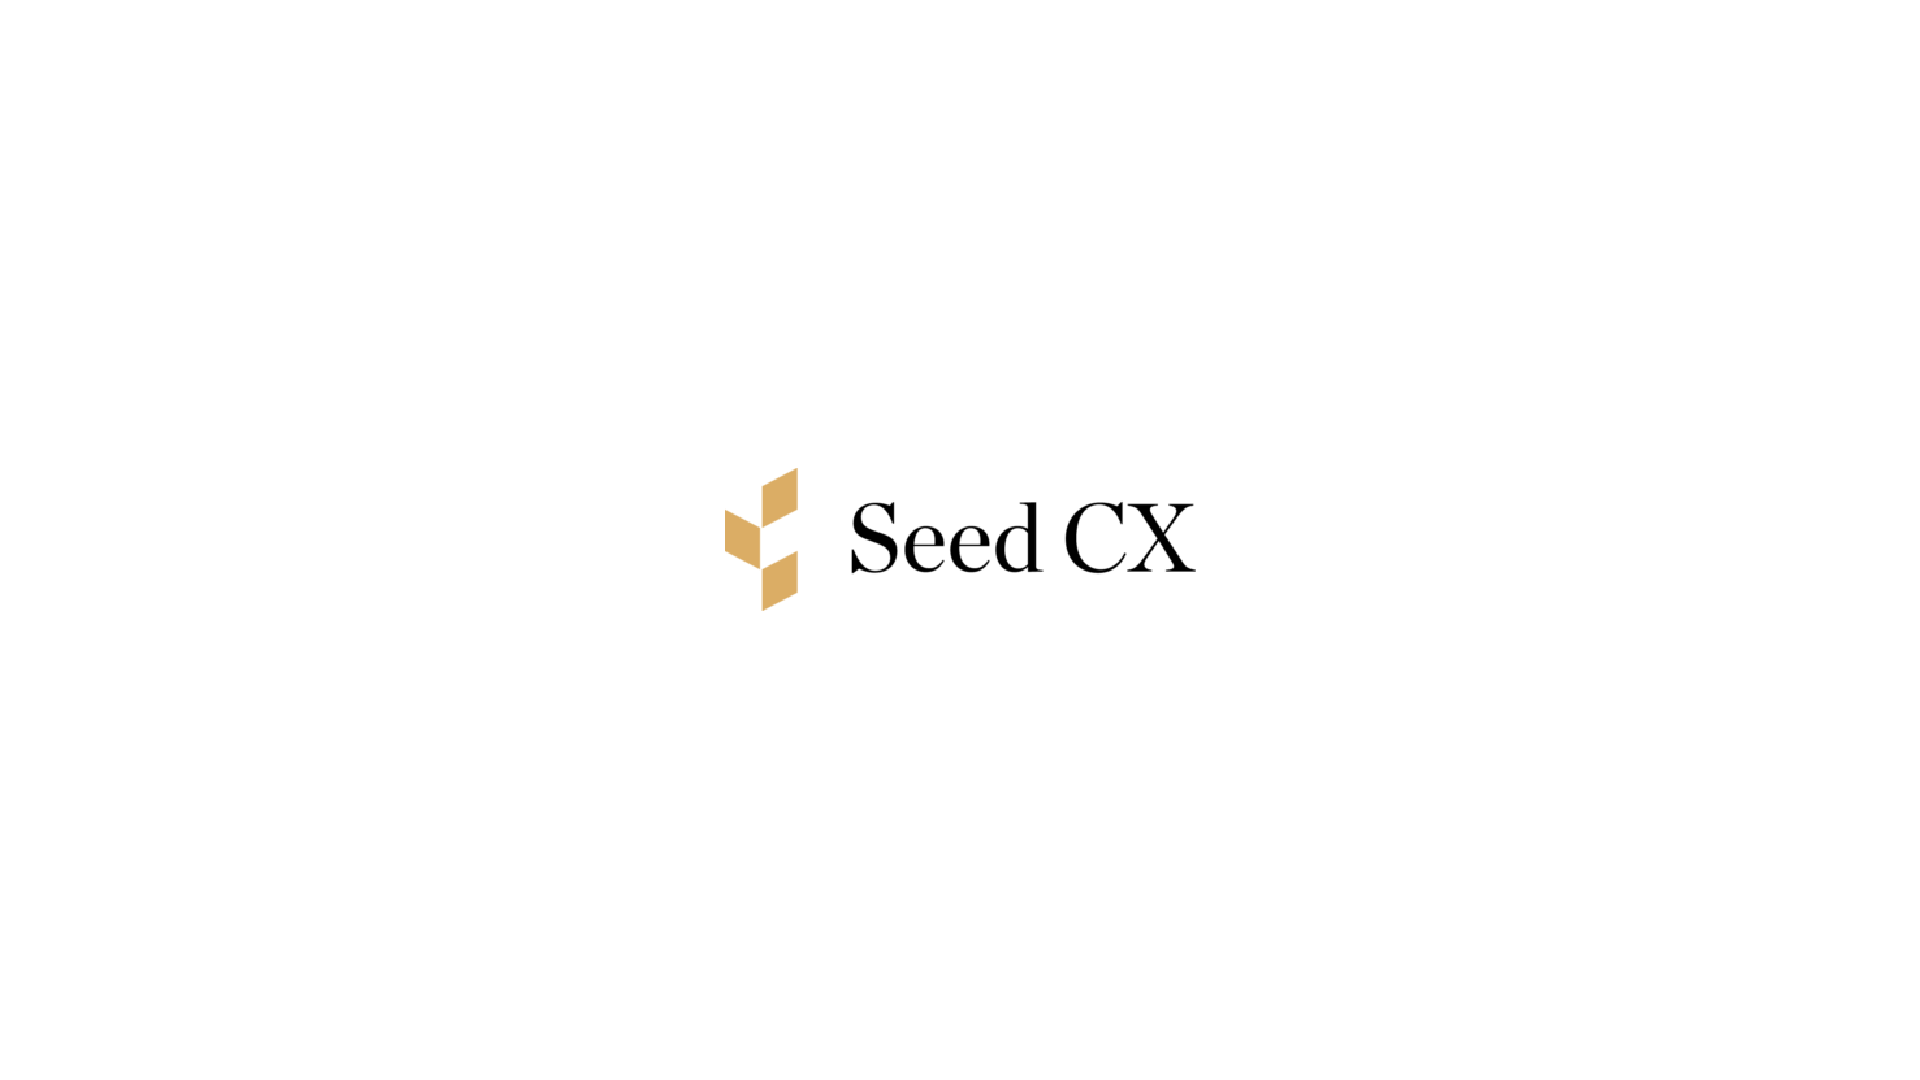 Avelacom partners with Seed CX to increase speed and stability for institutional investors globally